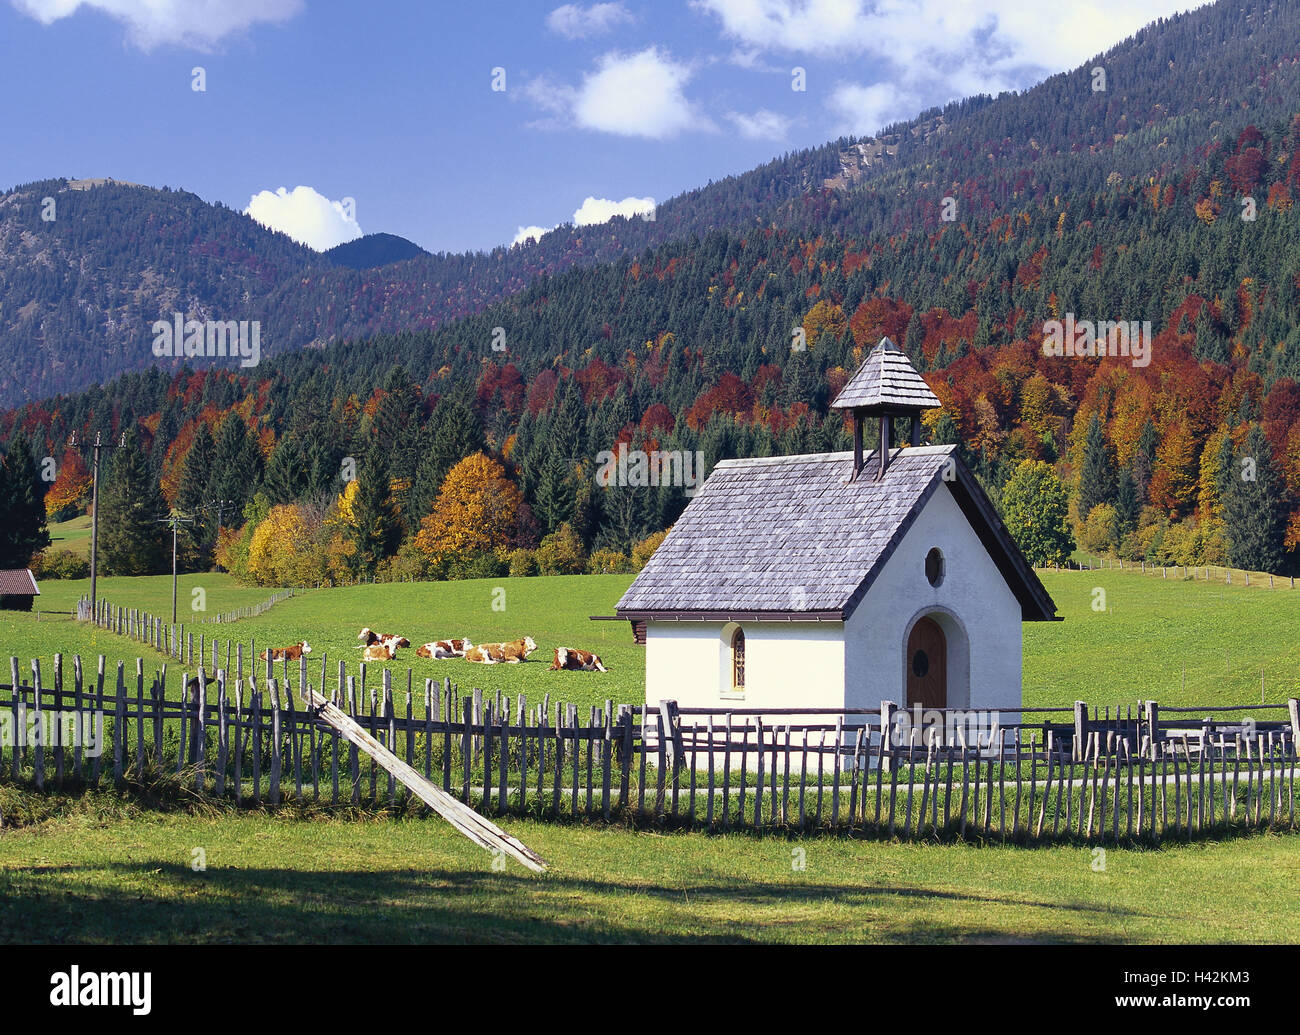 Germany, Bavaria, Gerold, band, Europe, South Germany, Upper Bavaria, Werdenfels, scenery, trees, wood, discoloration, autumn staining, autumn, season, heaven, clouds, mountains, scenery, Idyll, pasture, cows, fence, deserted, rurally, Stock Photo